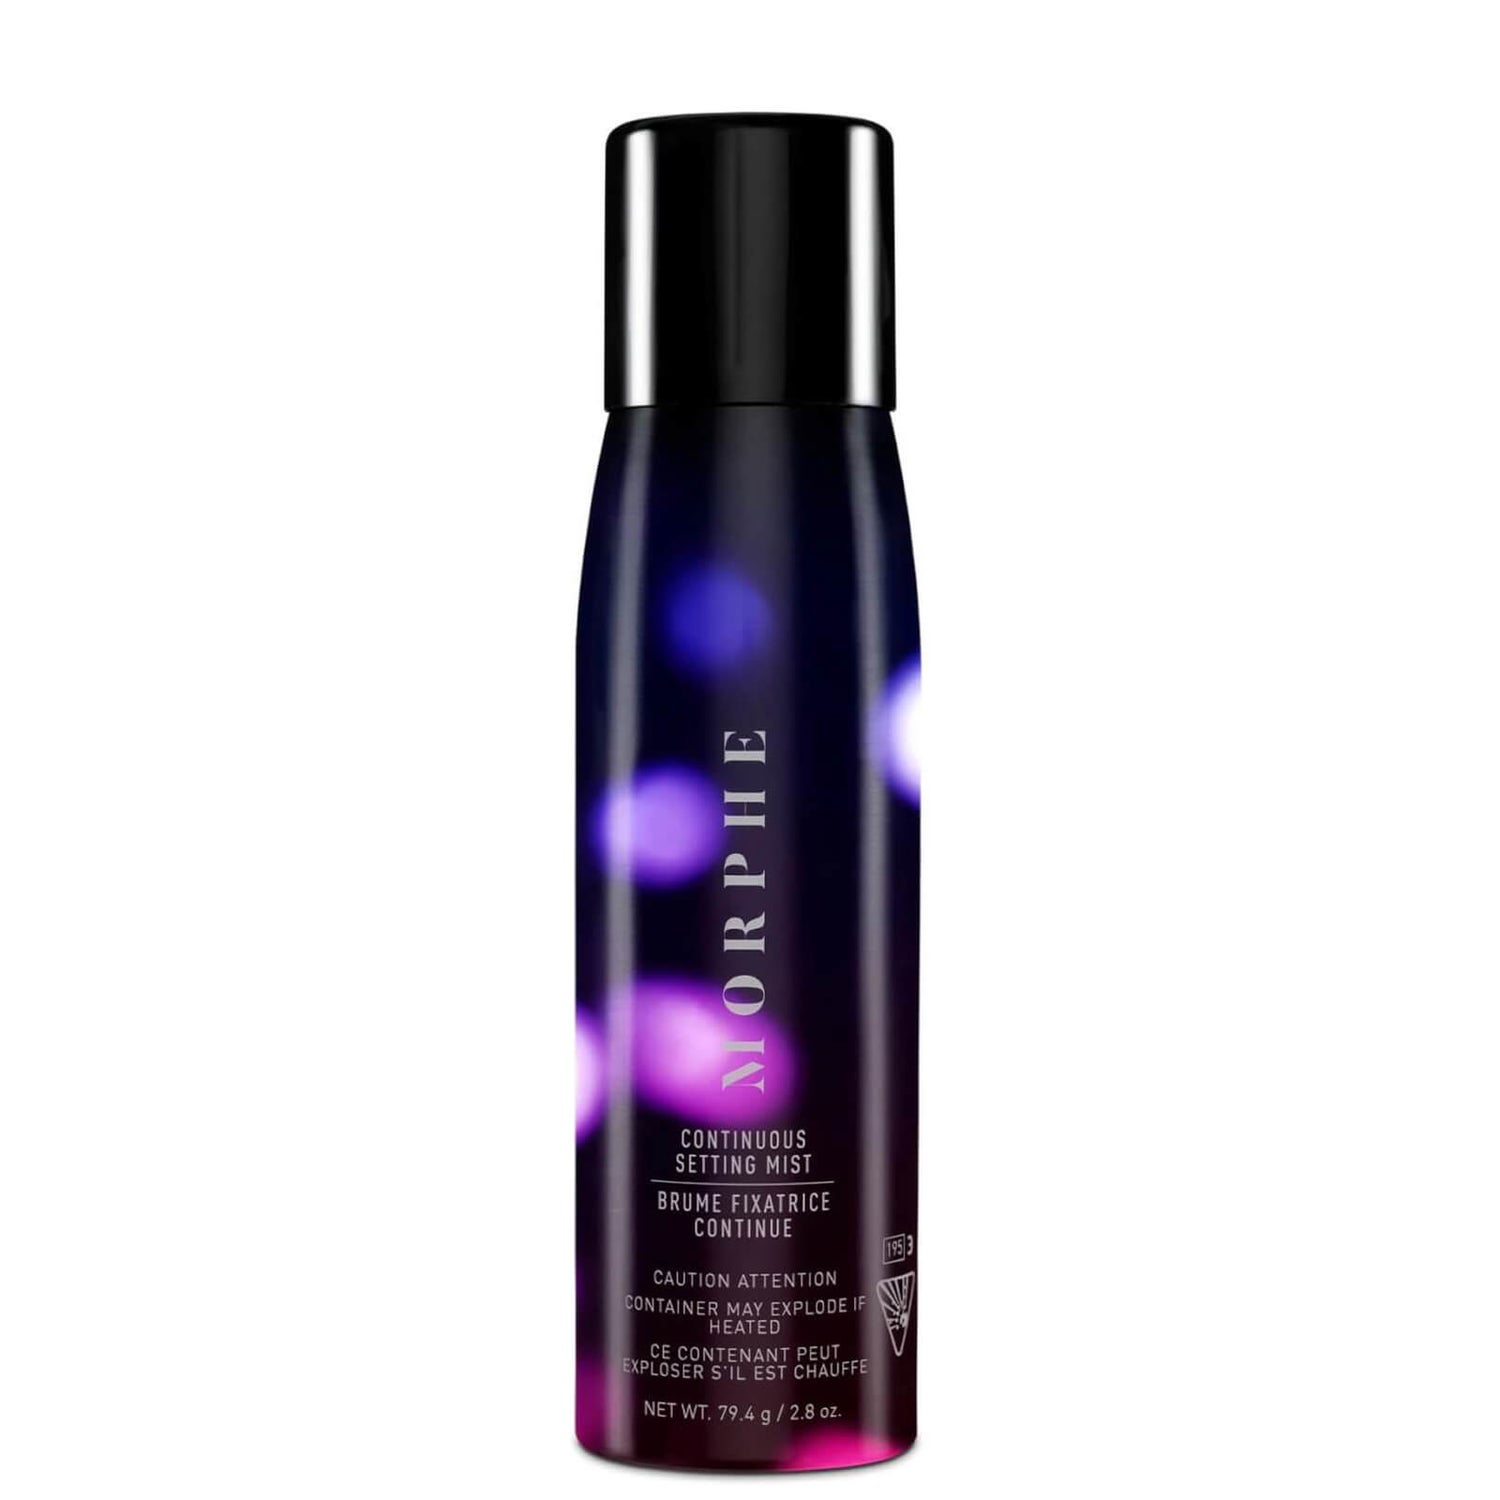 Morphe Limited Edition Continuous Setting Mist